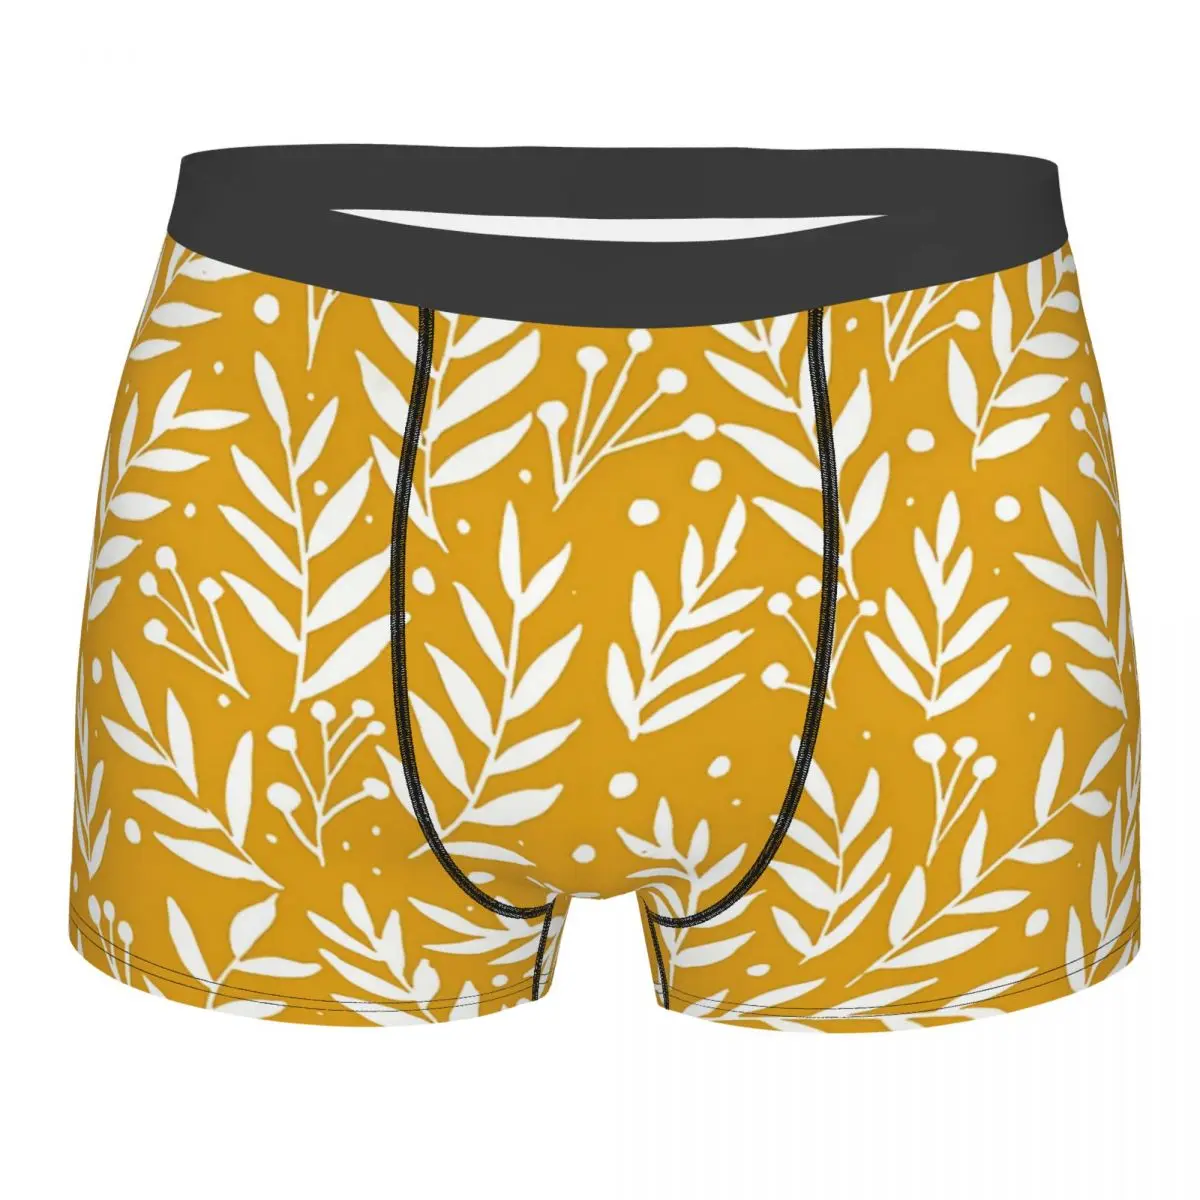 

Cute Branches Yellow Ochre Man's Boxer Briefs Underpants Highly Breathable High Quality Sexy Shorts Gift Idea